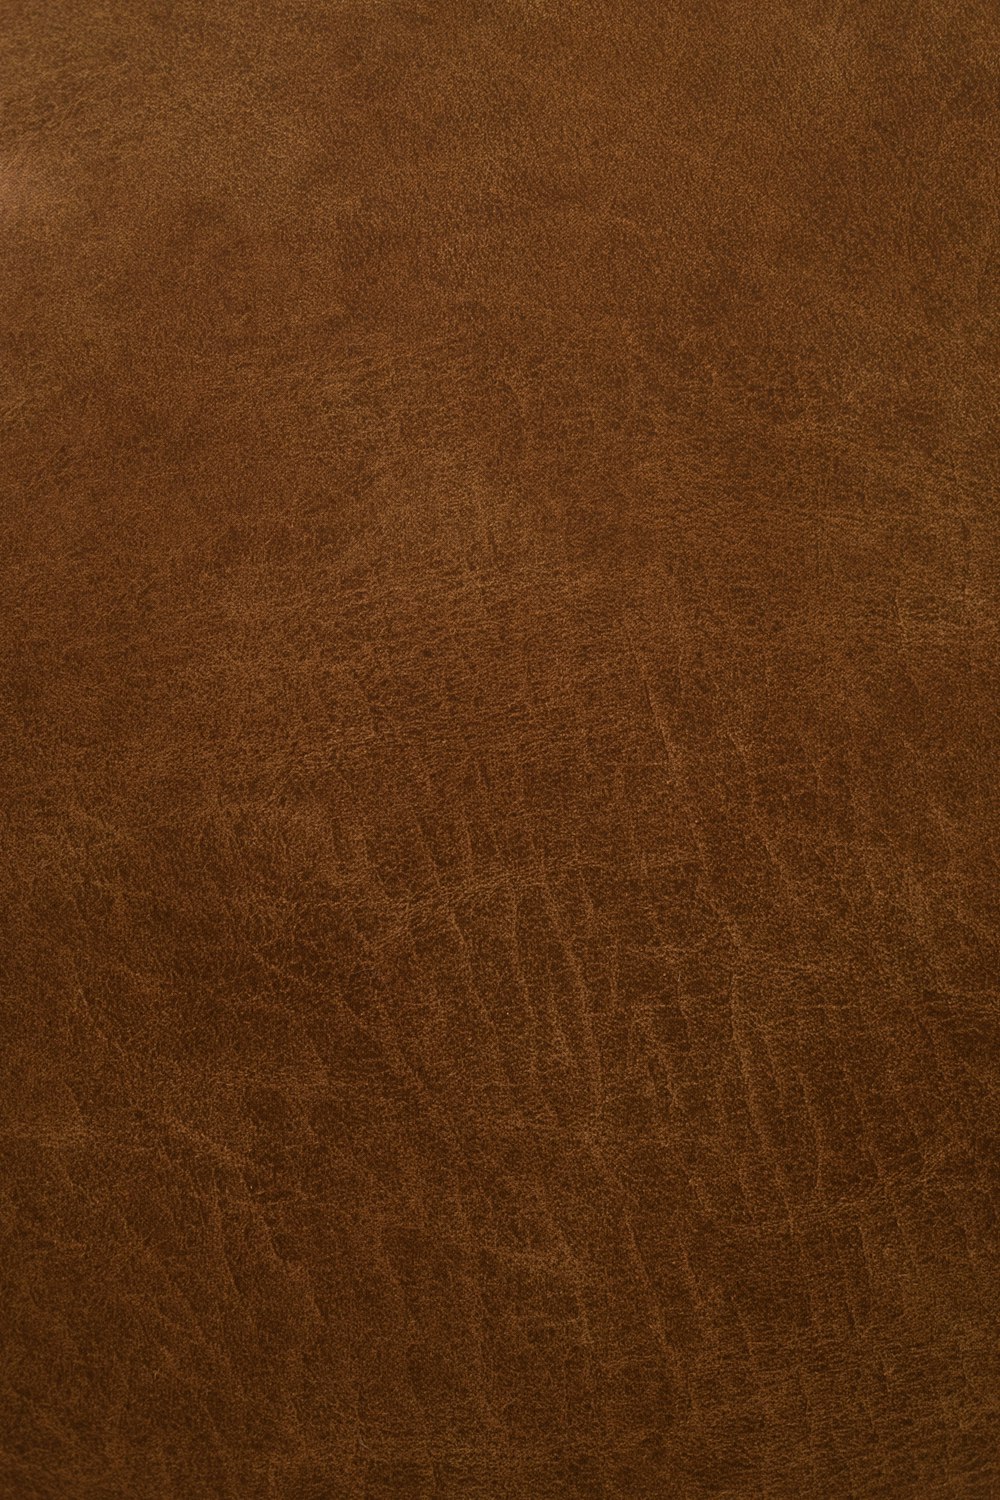 1000+ Brown Texture Pictures | Download Free Images on Unsplash